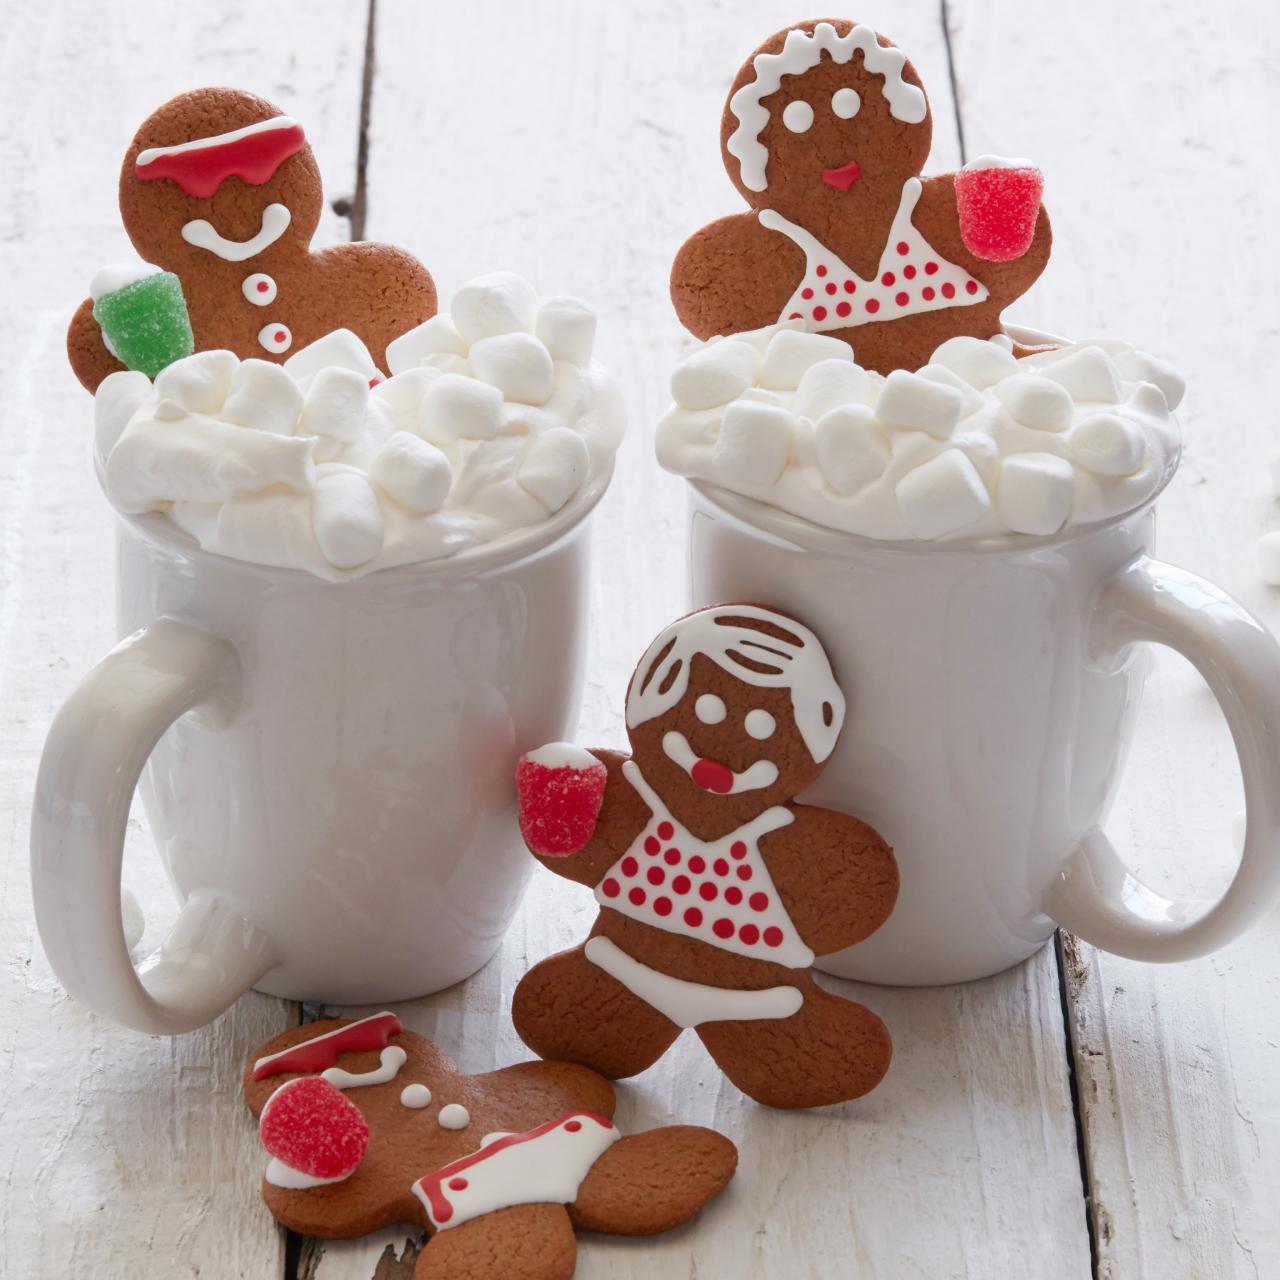 Gingerbread People in Gingerbread Hot Chocolate Tubs